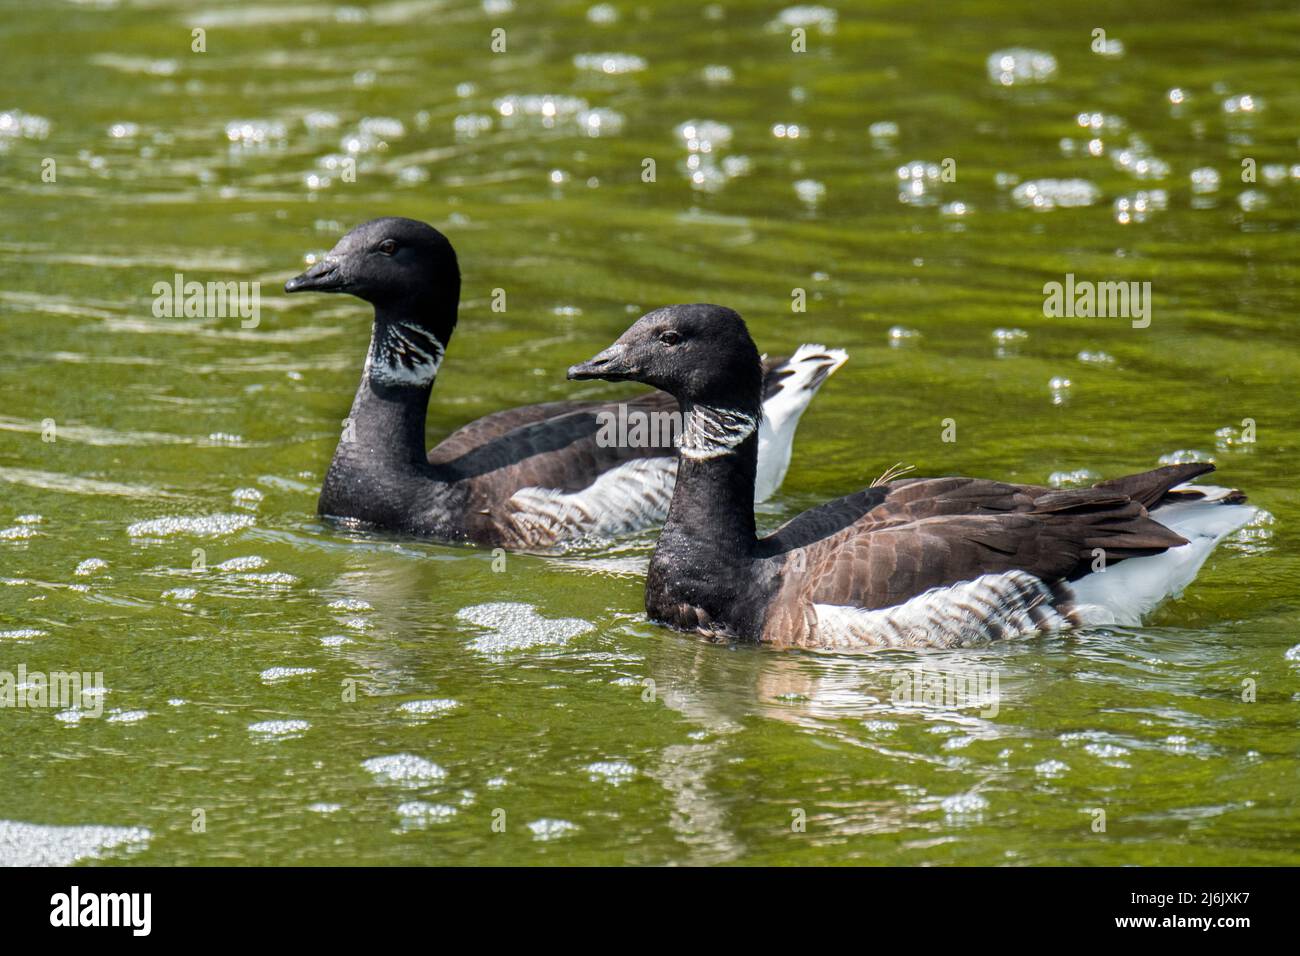 Black brant goose pair / Pacific brant (Branta bernicla nigricans), geese native to the Arctic tundra swimming in pond Stock Photo